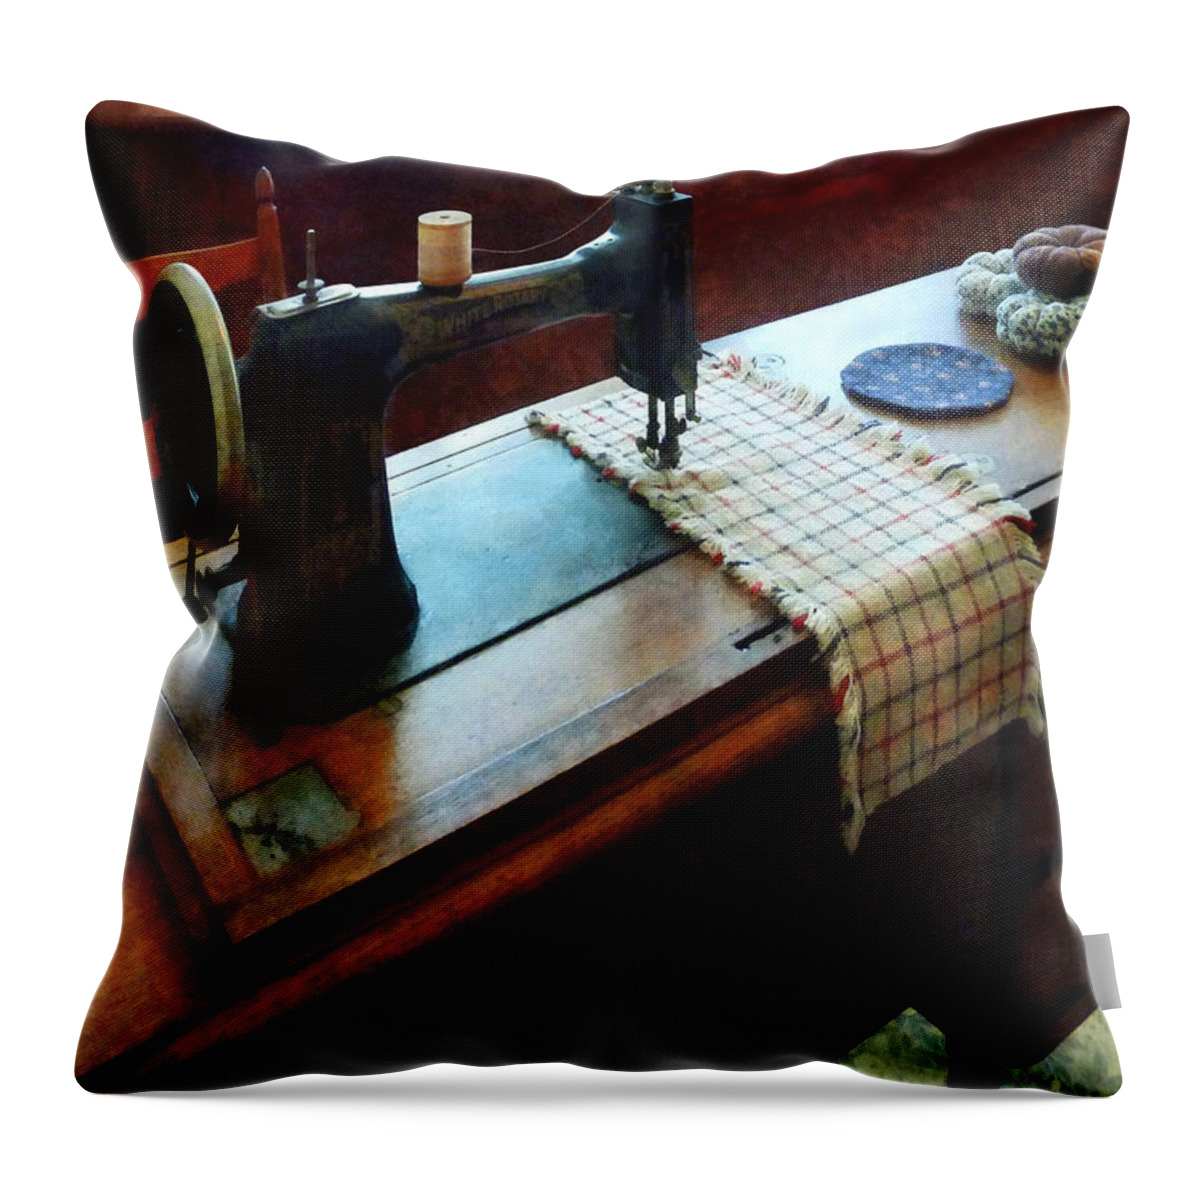 Sewing Machine Throw Pillow featuring the photograph Sewing Machine and Pincushions by Susan Savad